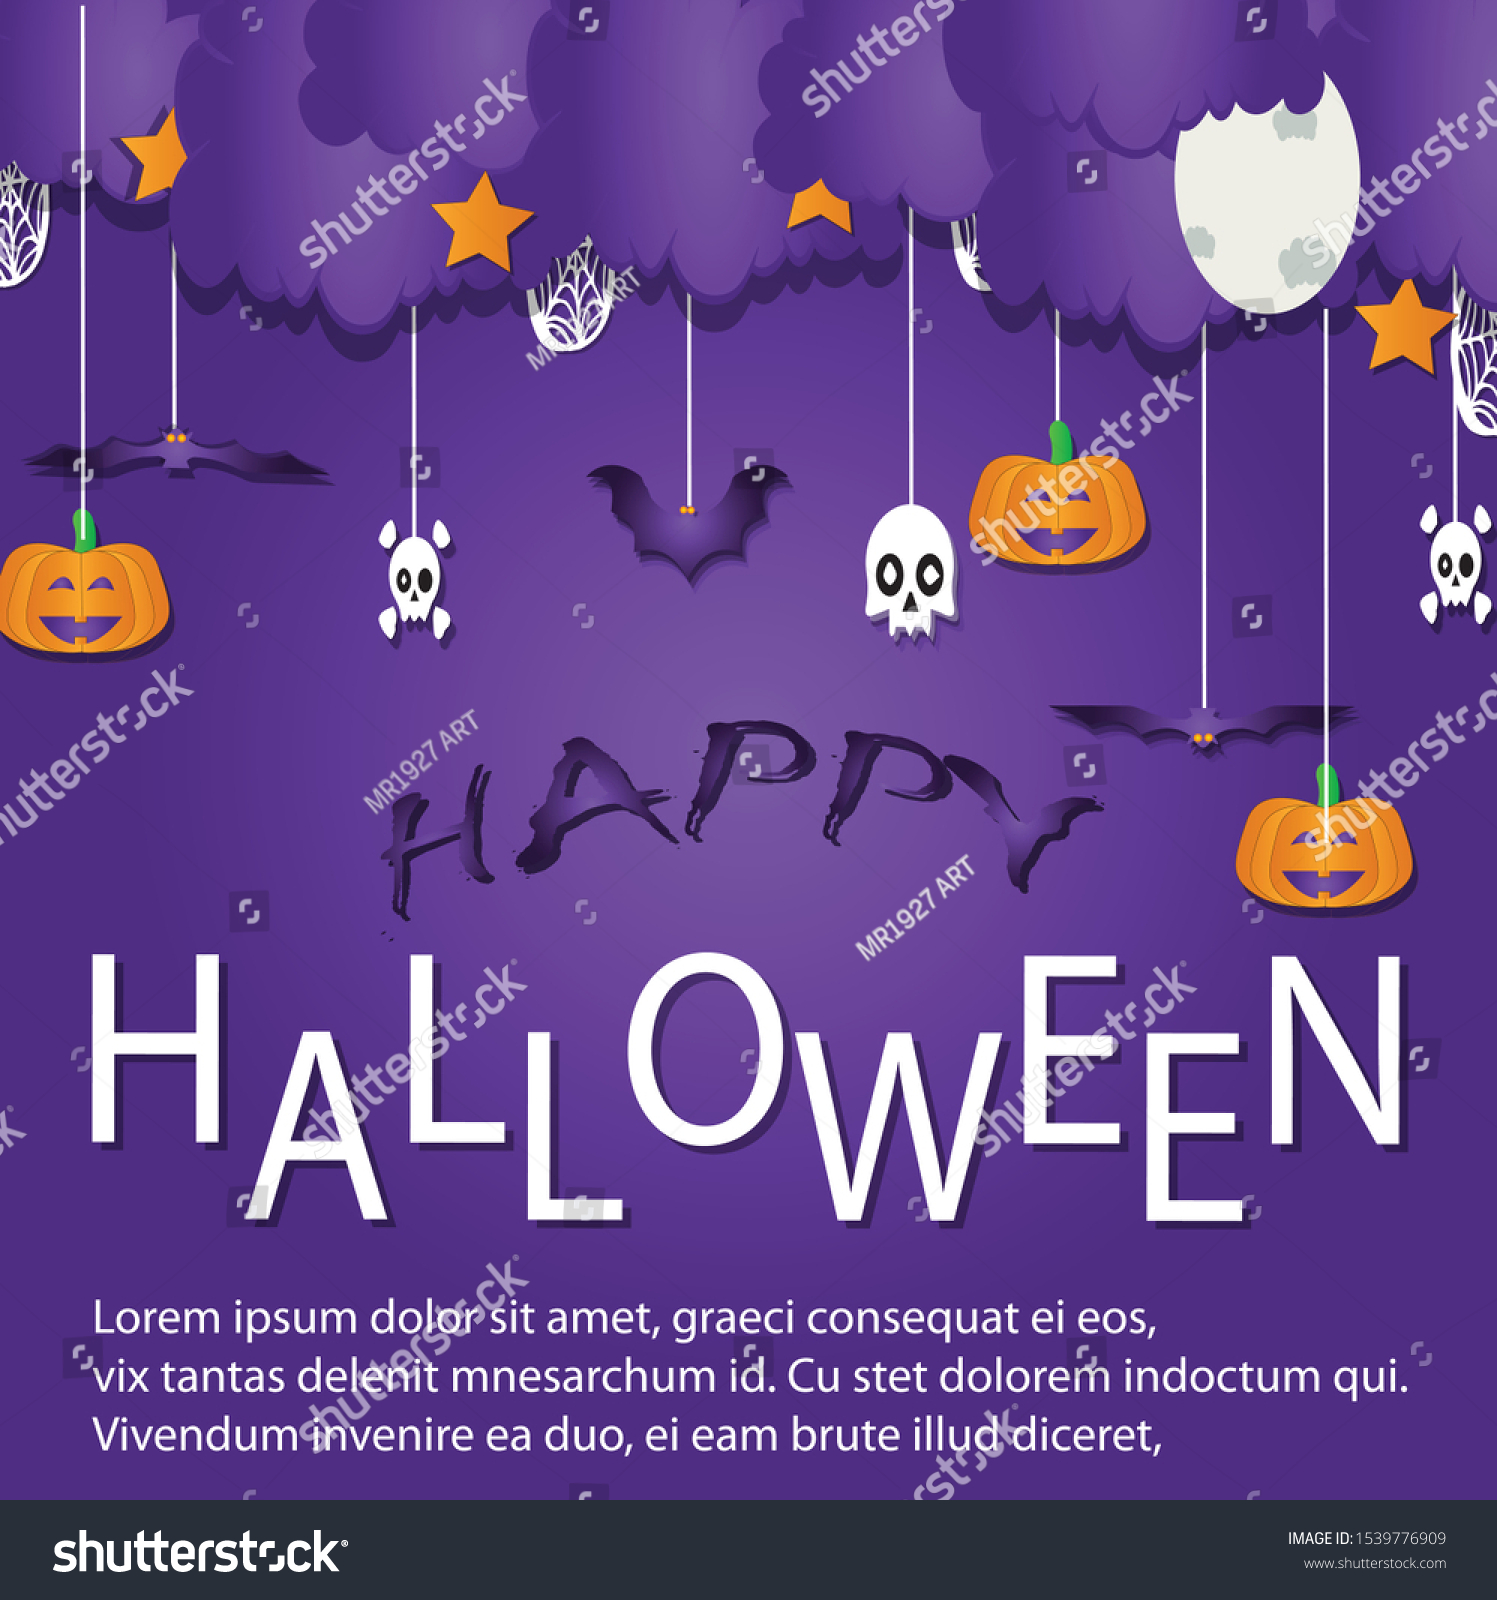 Halloween modern minimalistic design template for Website, greeting or promo banner, flyer, poster in paper cut style with cutest pumpkin and other traditional Halloween elements.editable text #1539776909